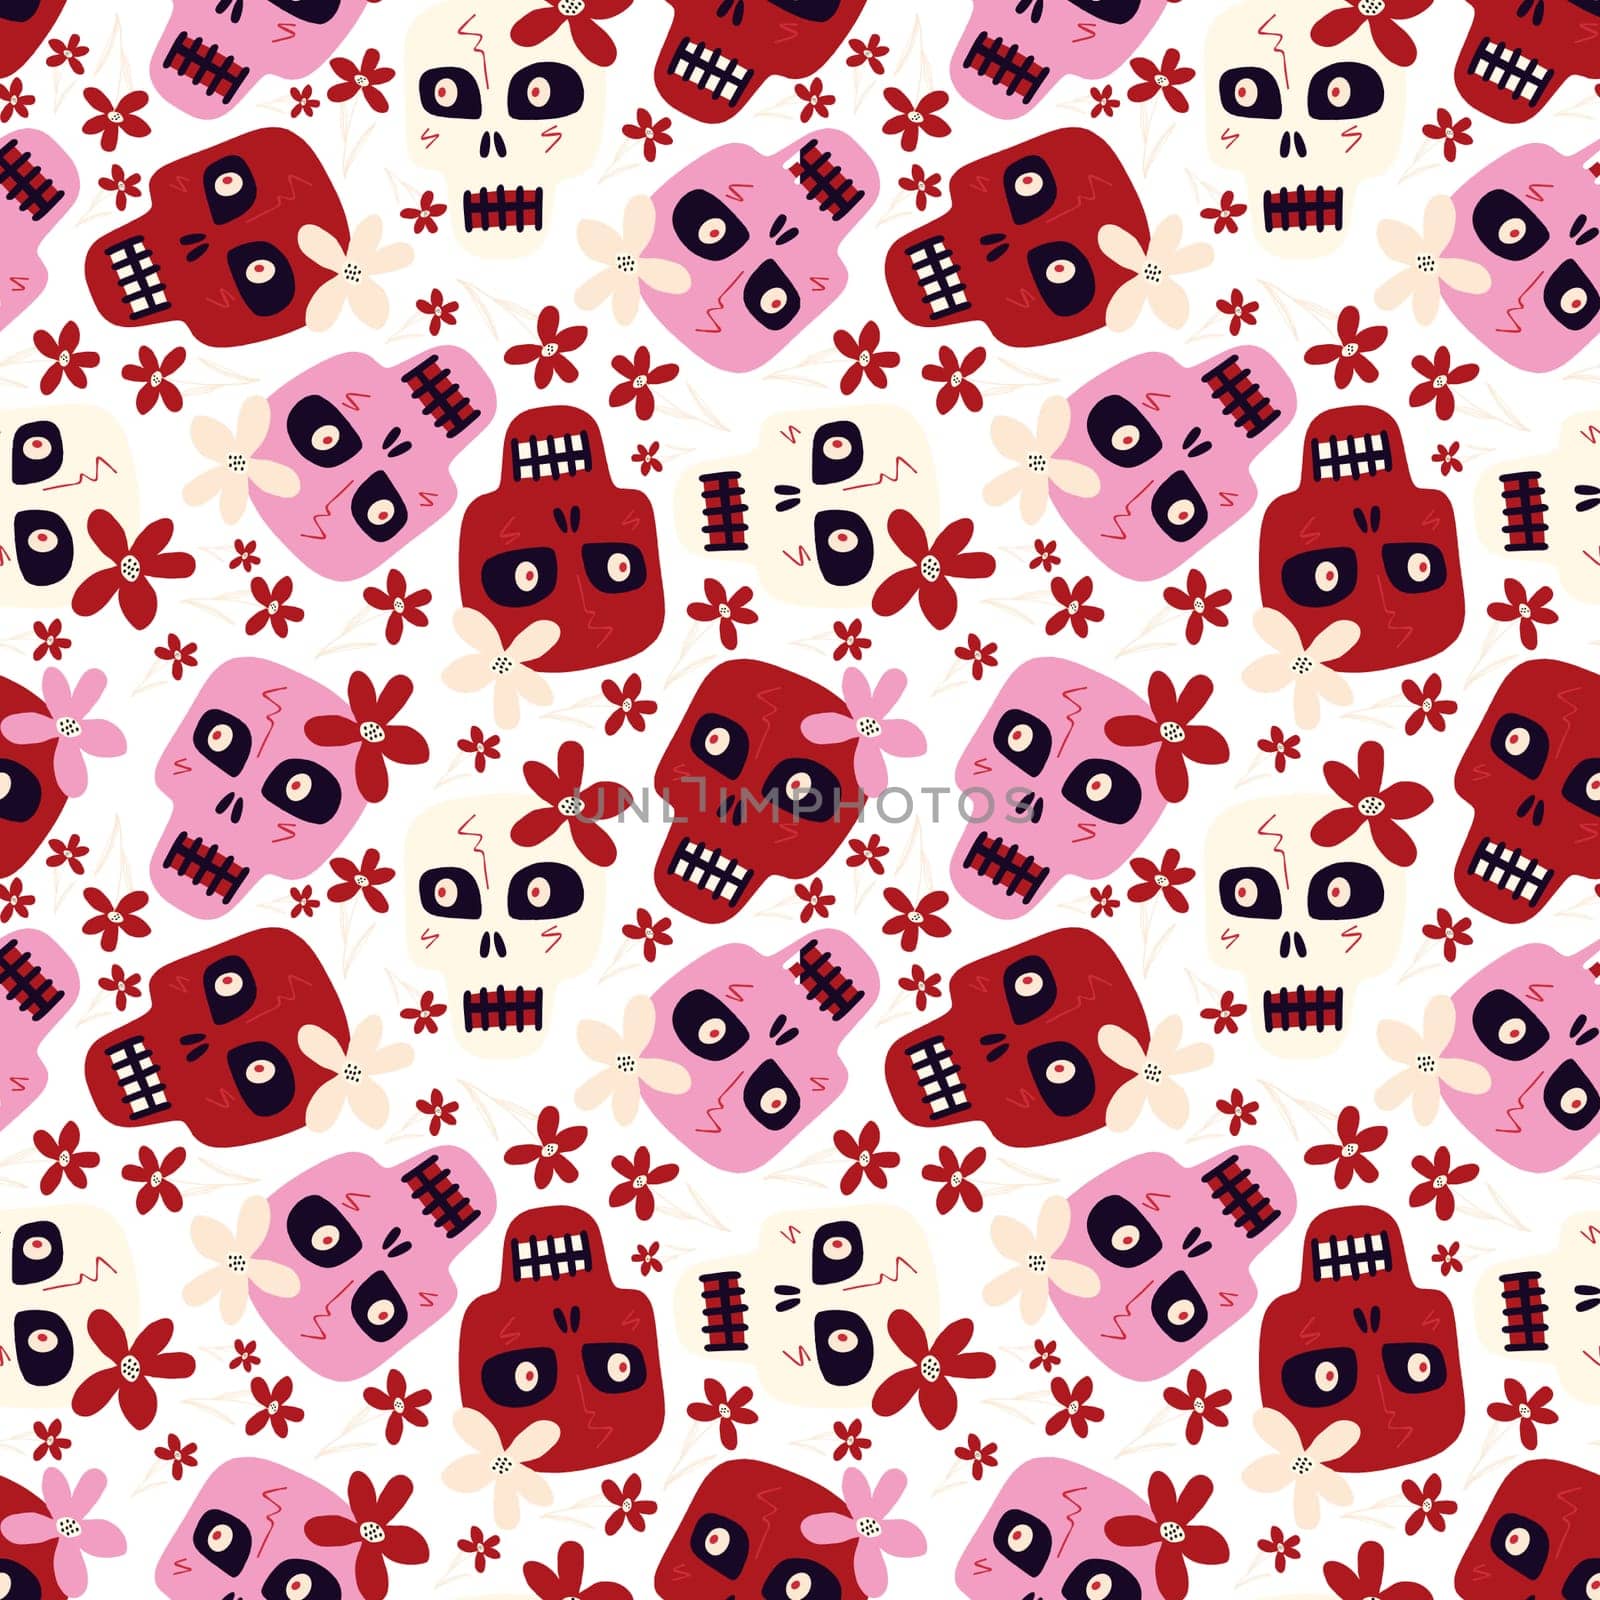 Purple and red Halloween cute cartoon pattern with funny skulls with a flowers by Dustick